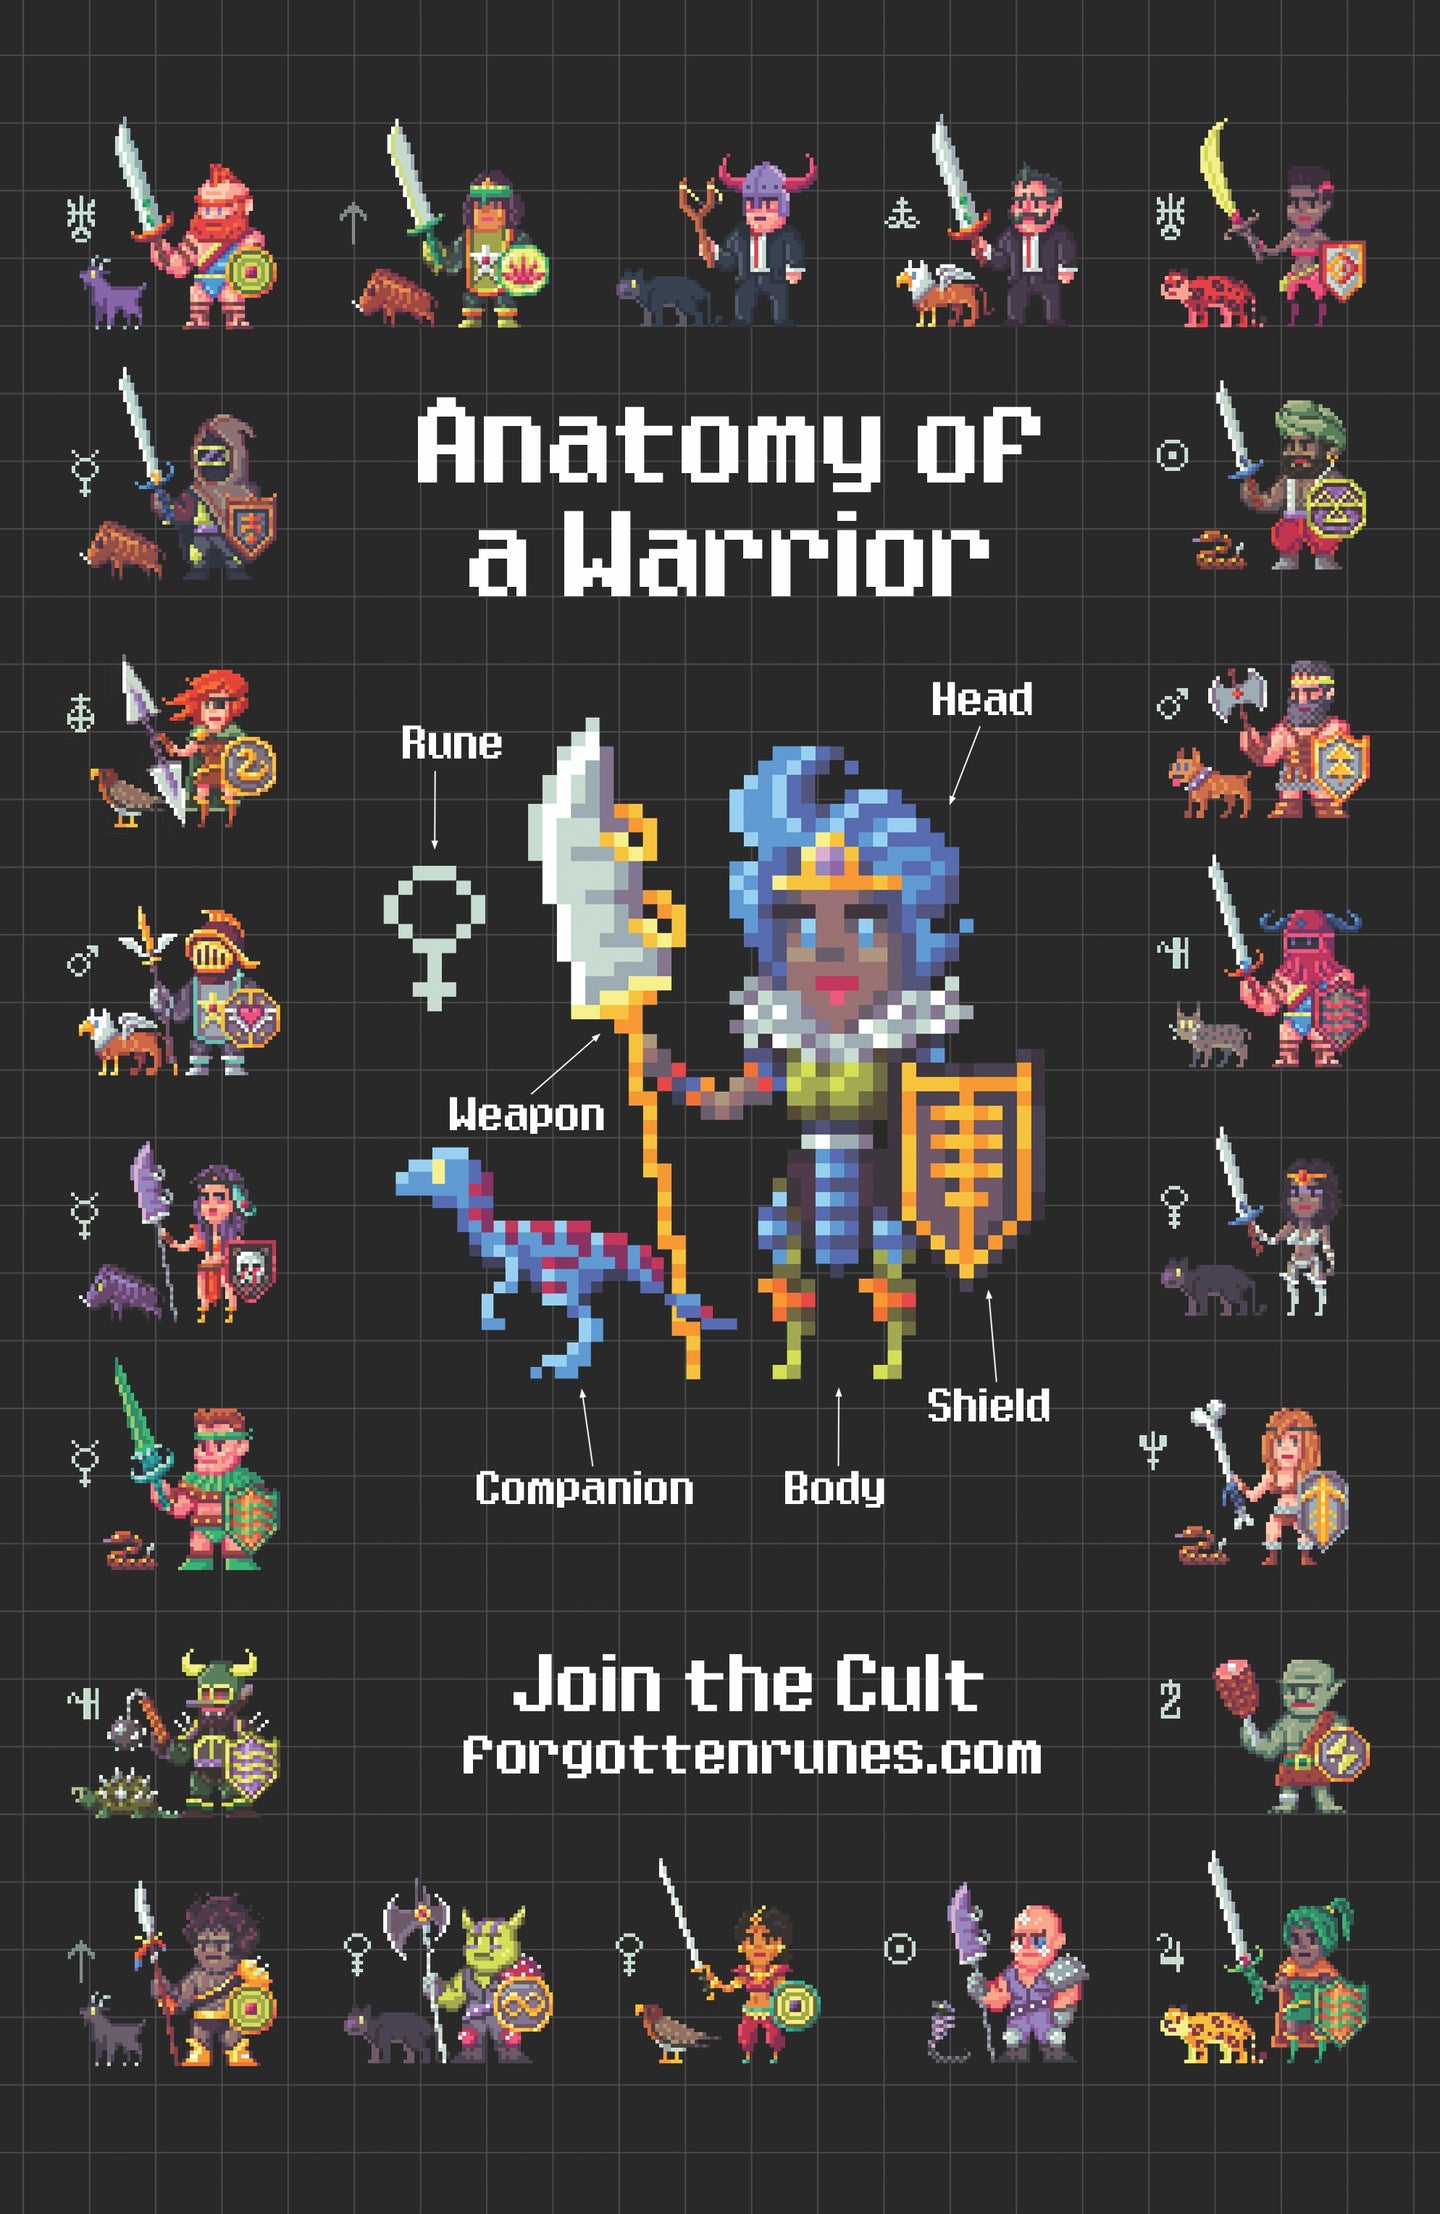 Anatomy of a Warrior Poster